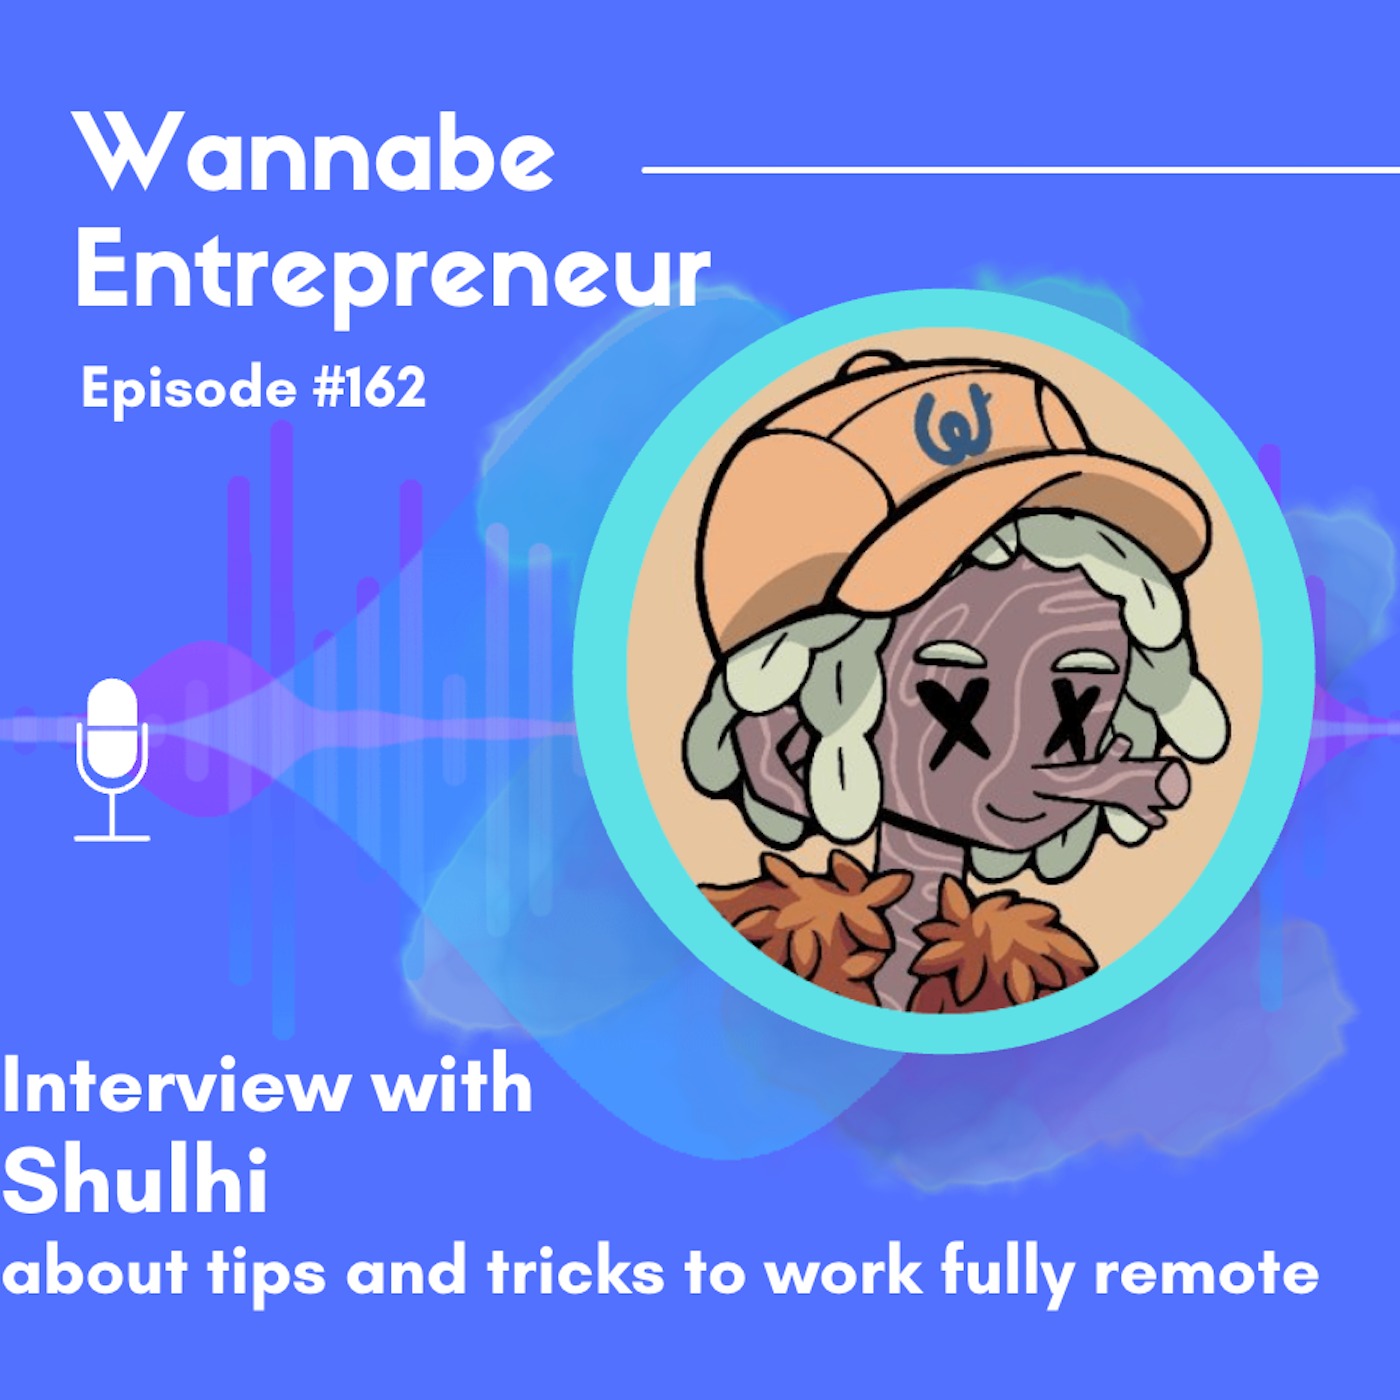 Interviewing Shulhi about tips and tricks to work fully remote